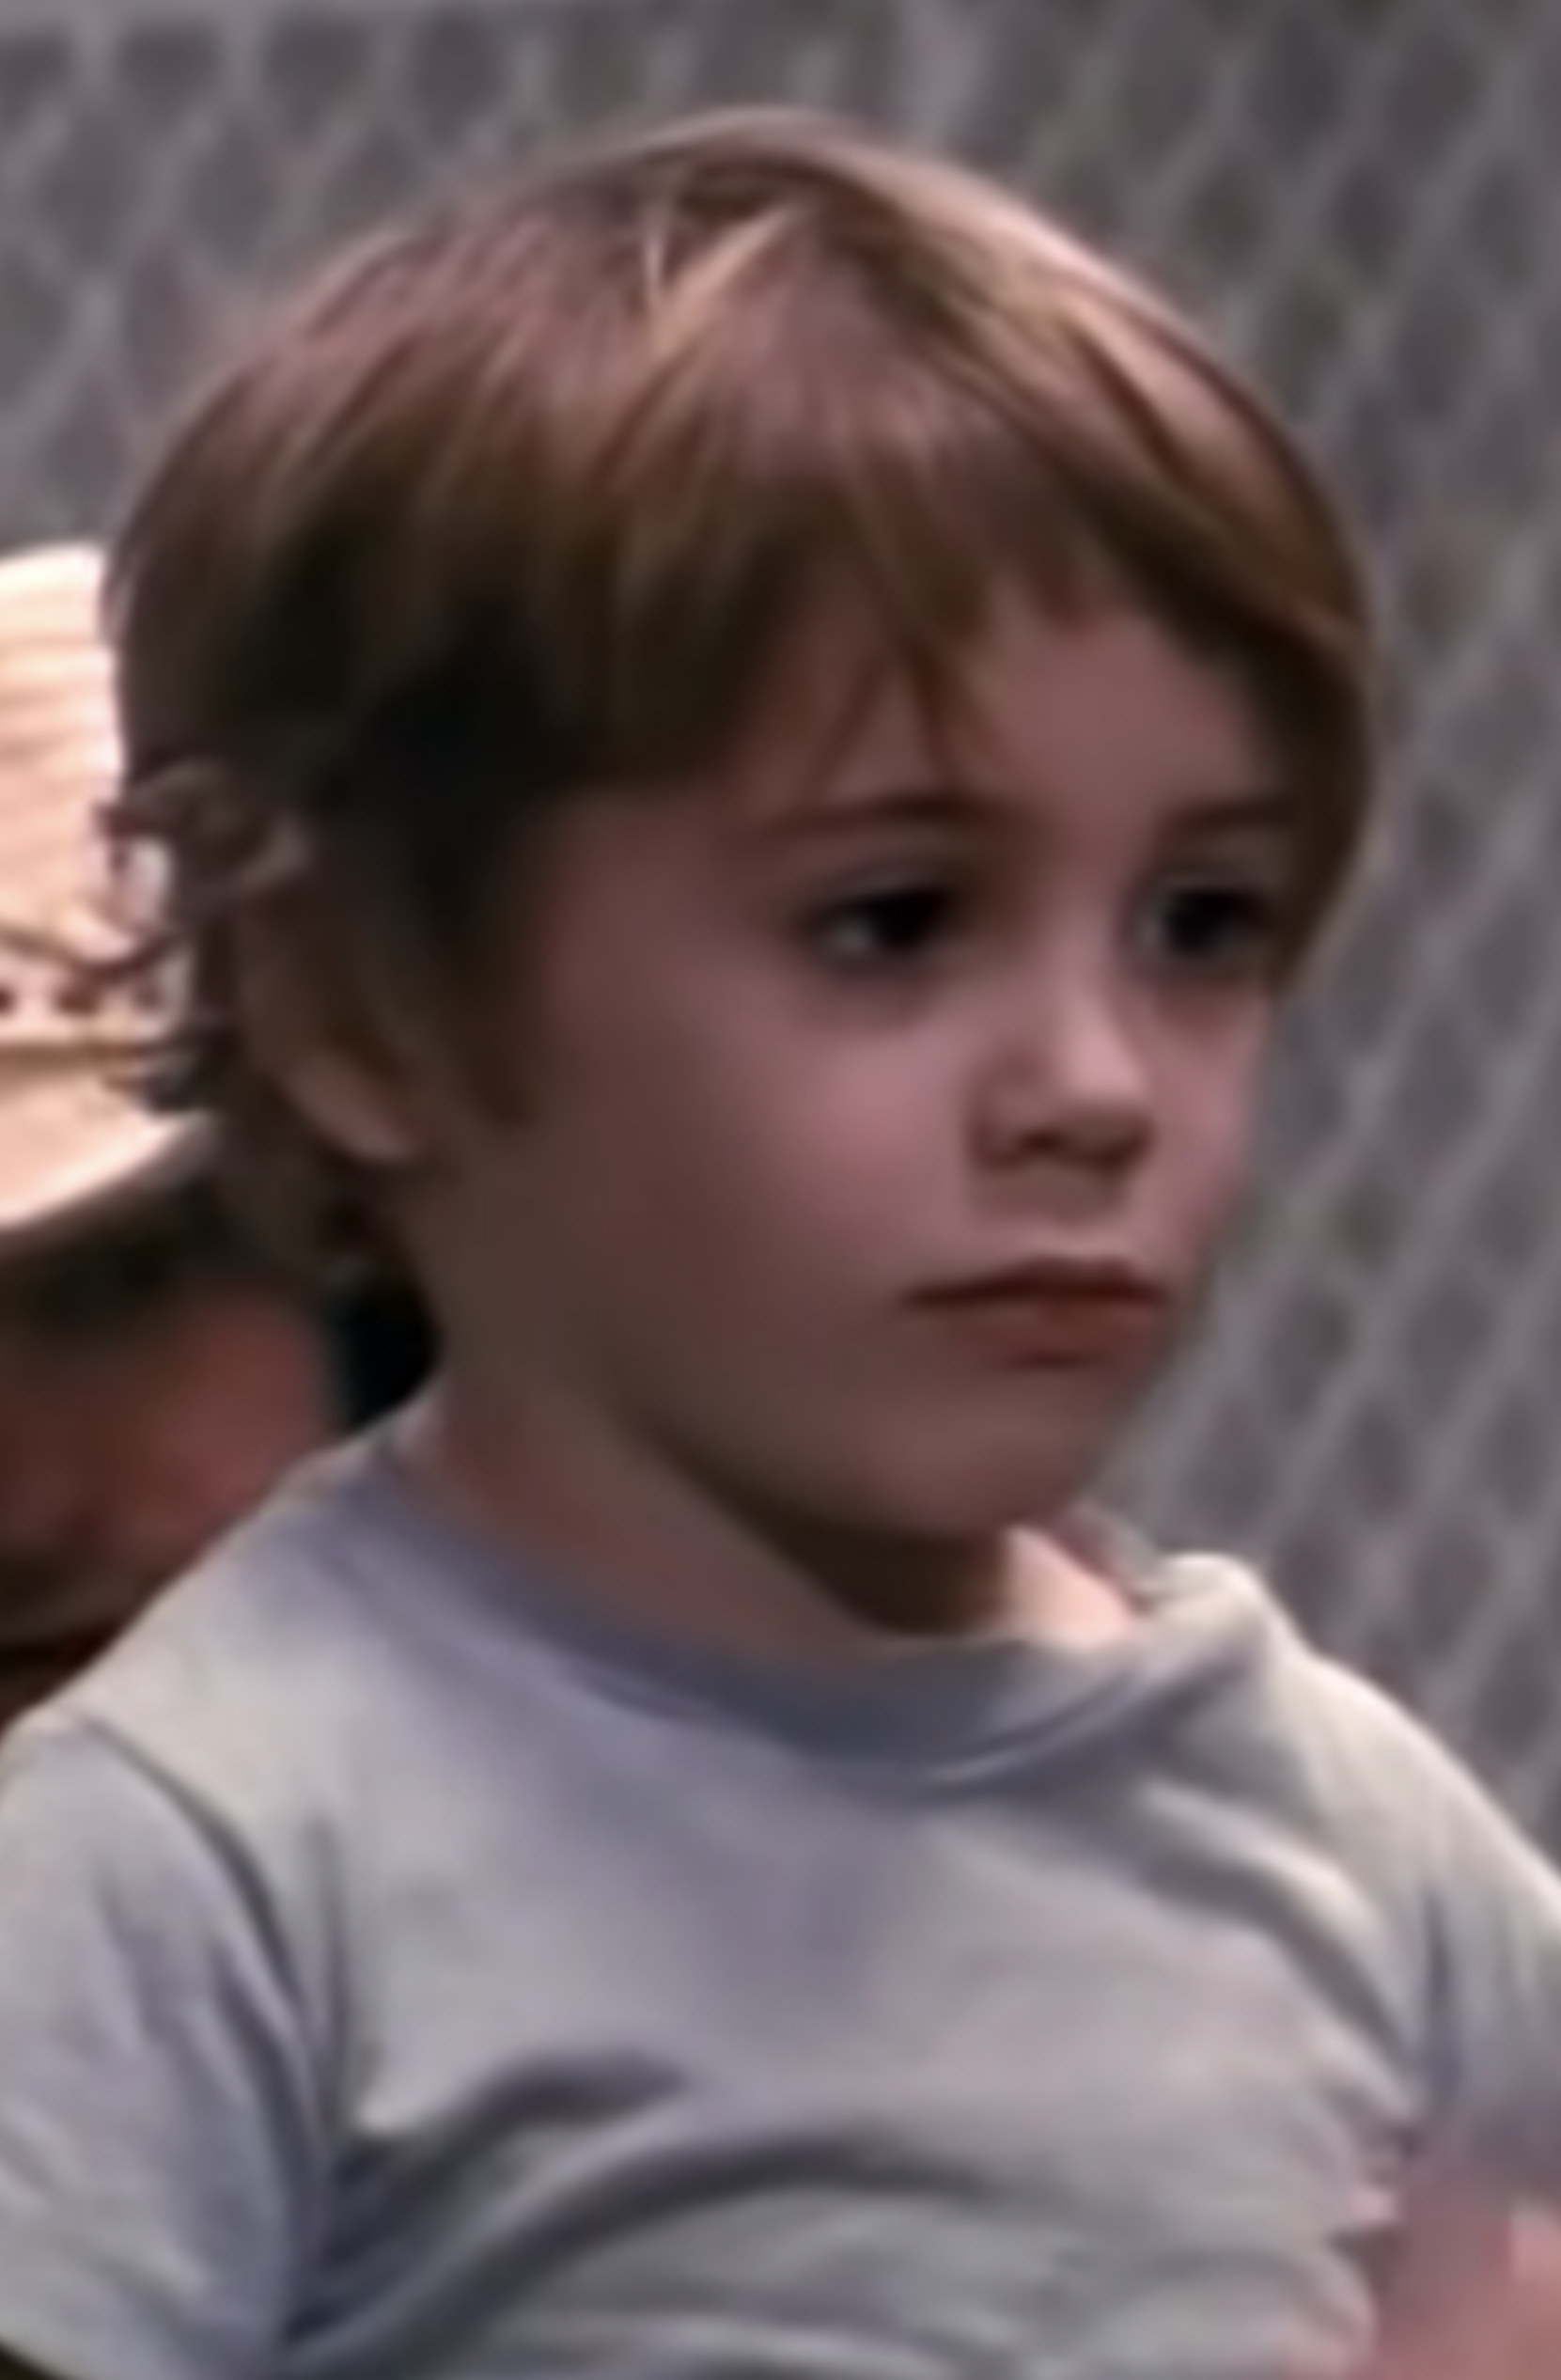 Young Robert Downey Jr. as a kid talking to someone in a jail cell